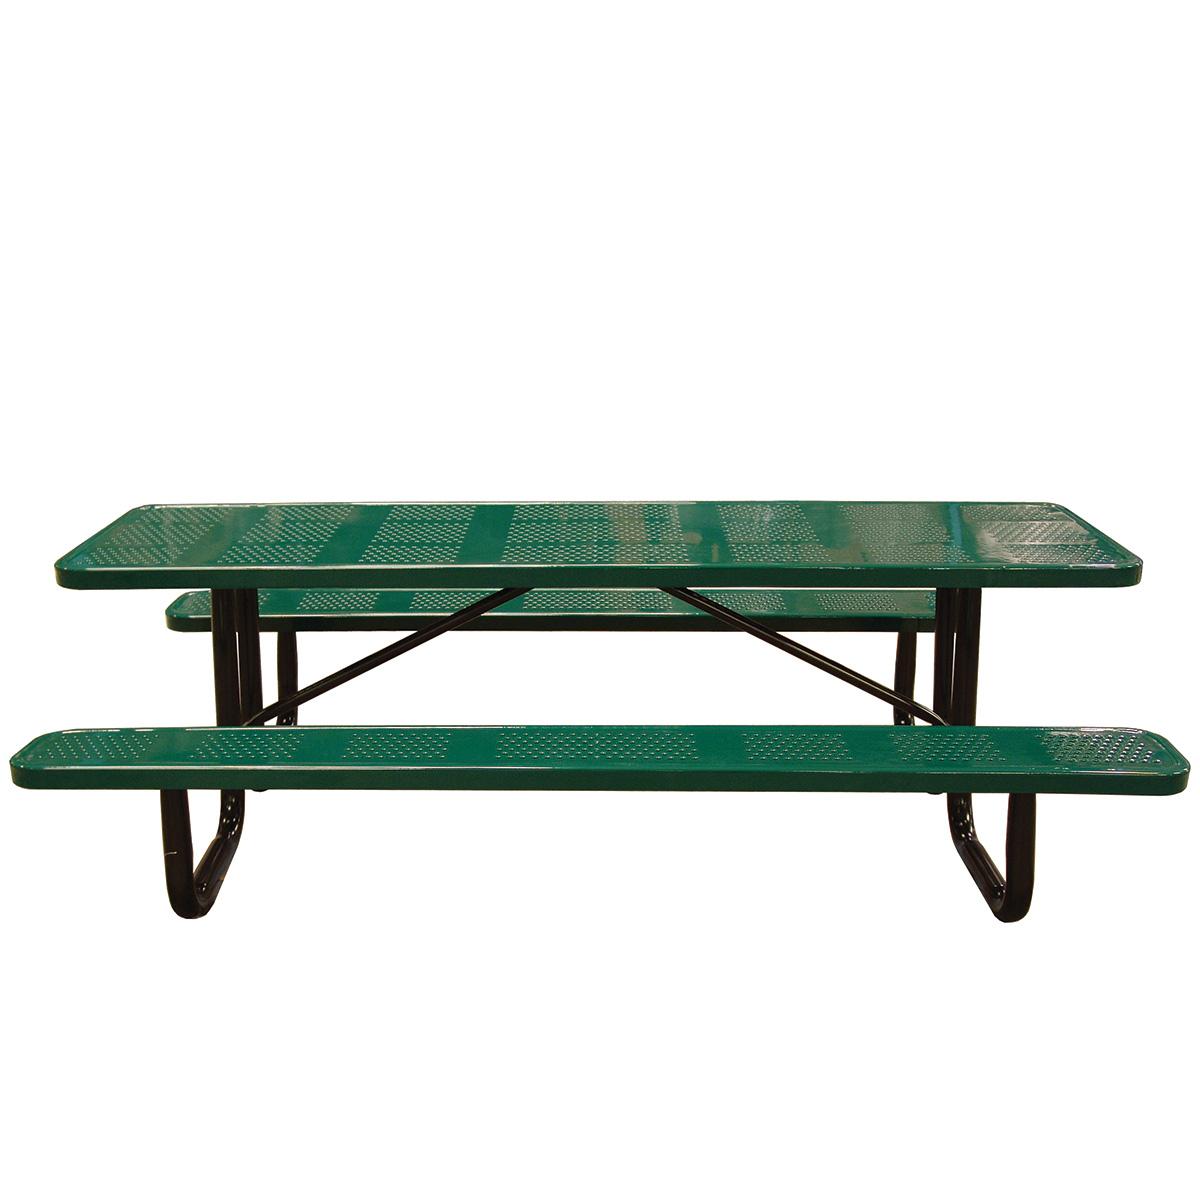 Leisure Craft 10′ Portable Picnic Table Perforated